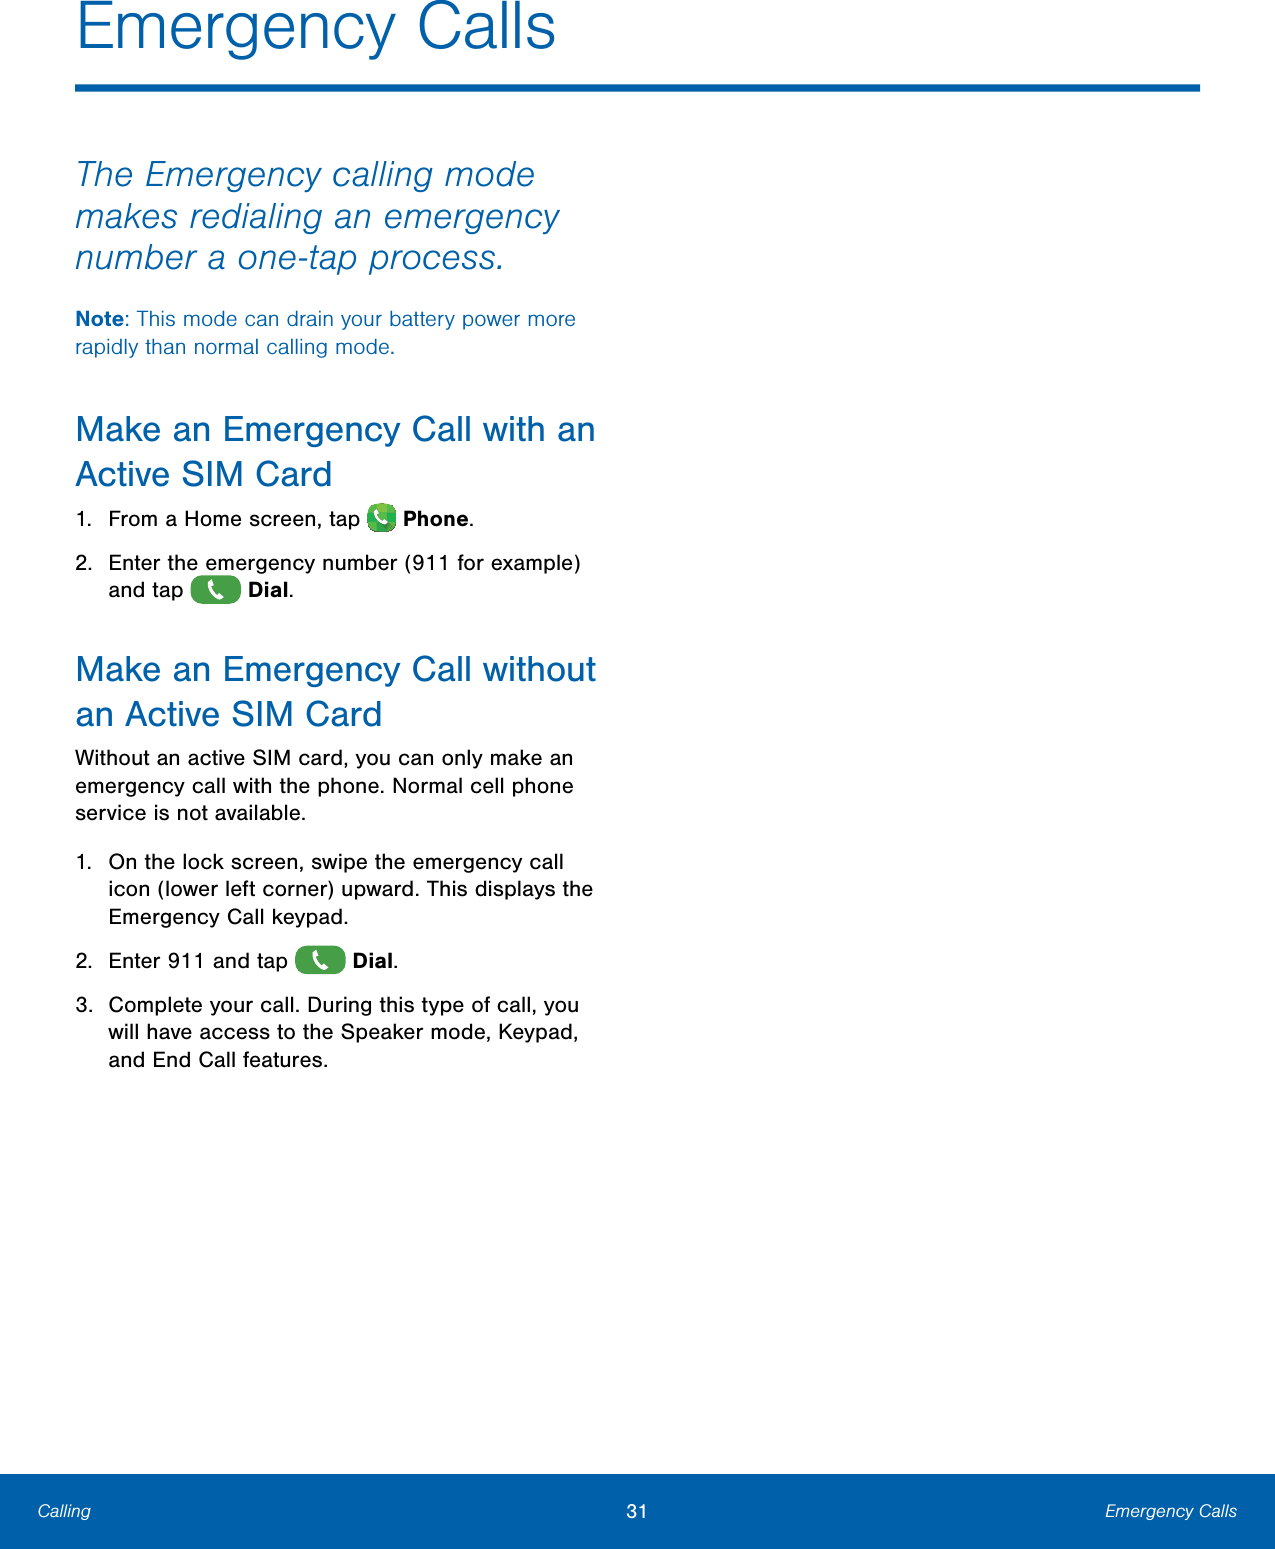        Emergency Calls  The Emergency calling mode makes redialing an emergency number a one-tap process. Note: This mode can drain your battery power more rapidly than normal calling mode. Make an Emergency Call with an Active SIMCard 1.  From a Home screen, tap   Phone. 2.   Enter the emergency number (911 for example) and tap   Dial. Make an Emergency Call without an Active SIMCard Without an active SIM card, you can only make an emergency call with the phone. Normal cell phone service is not available. 1.   On the lock screen, swipe the emergency call icon (lower left corner) upward. This displays the Emergency Call keypad. 2.  Enter 911 and tap   Dial. 3.  Complete your call. During this type of call, you will have access to the Speaker mode, Keypad, and End Call features. Calling   31  Emergency Calls 